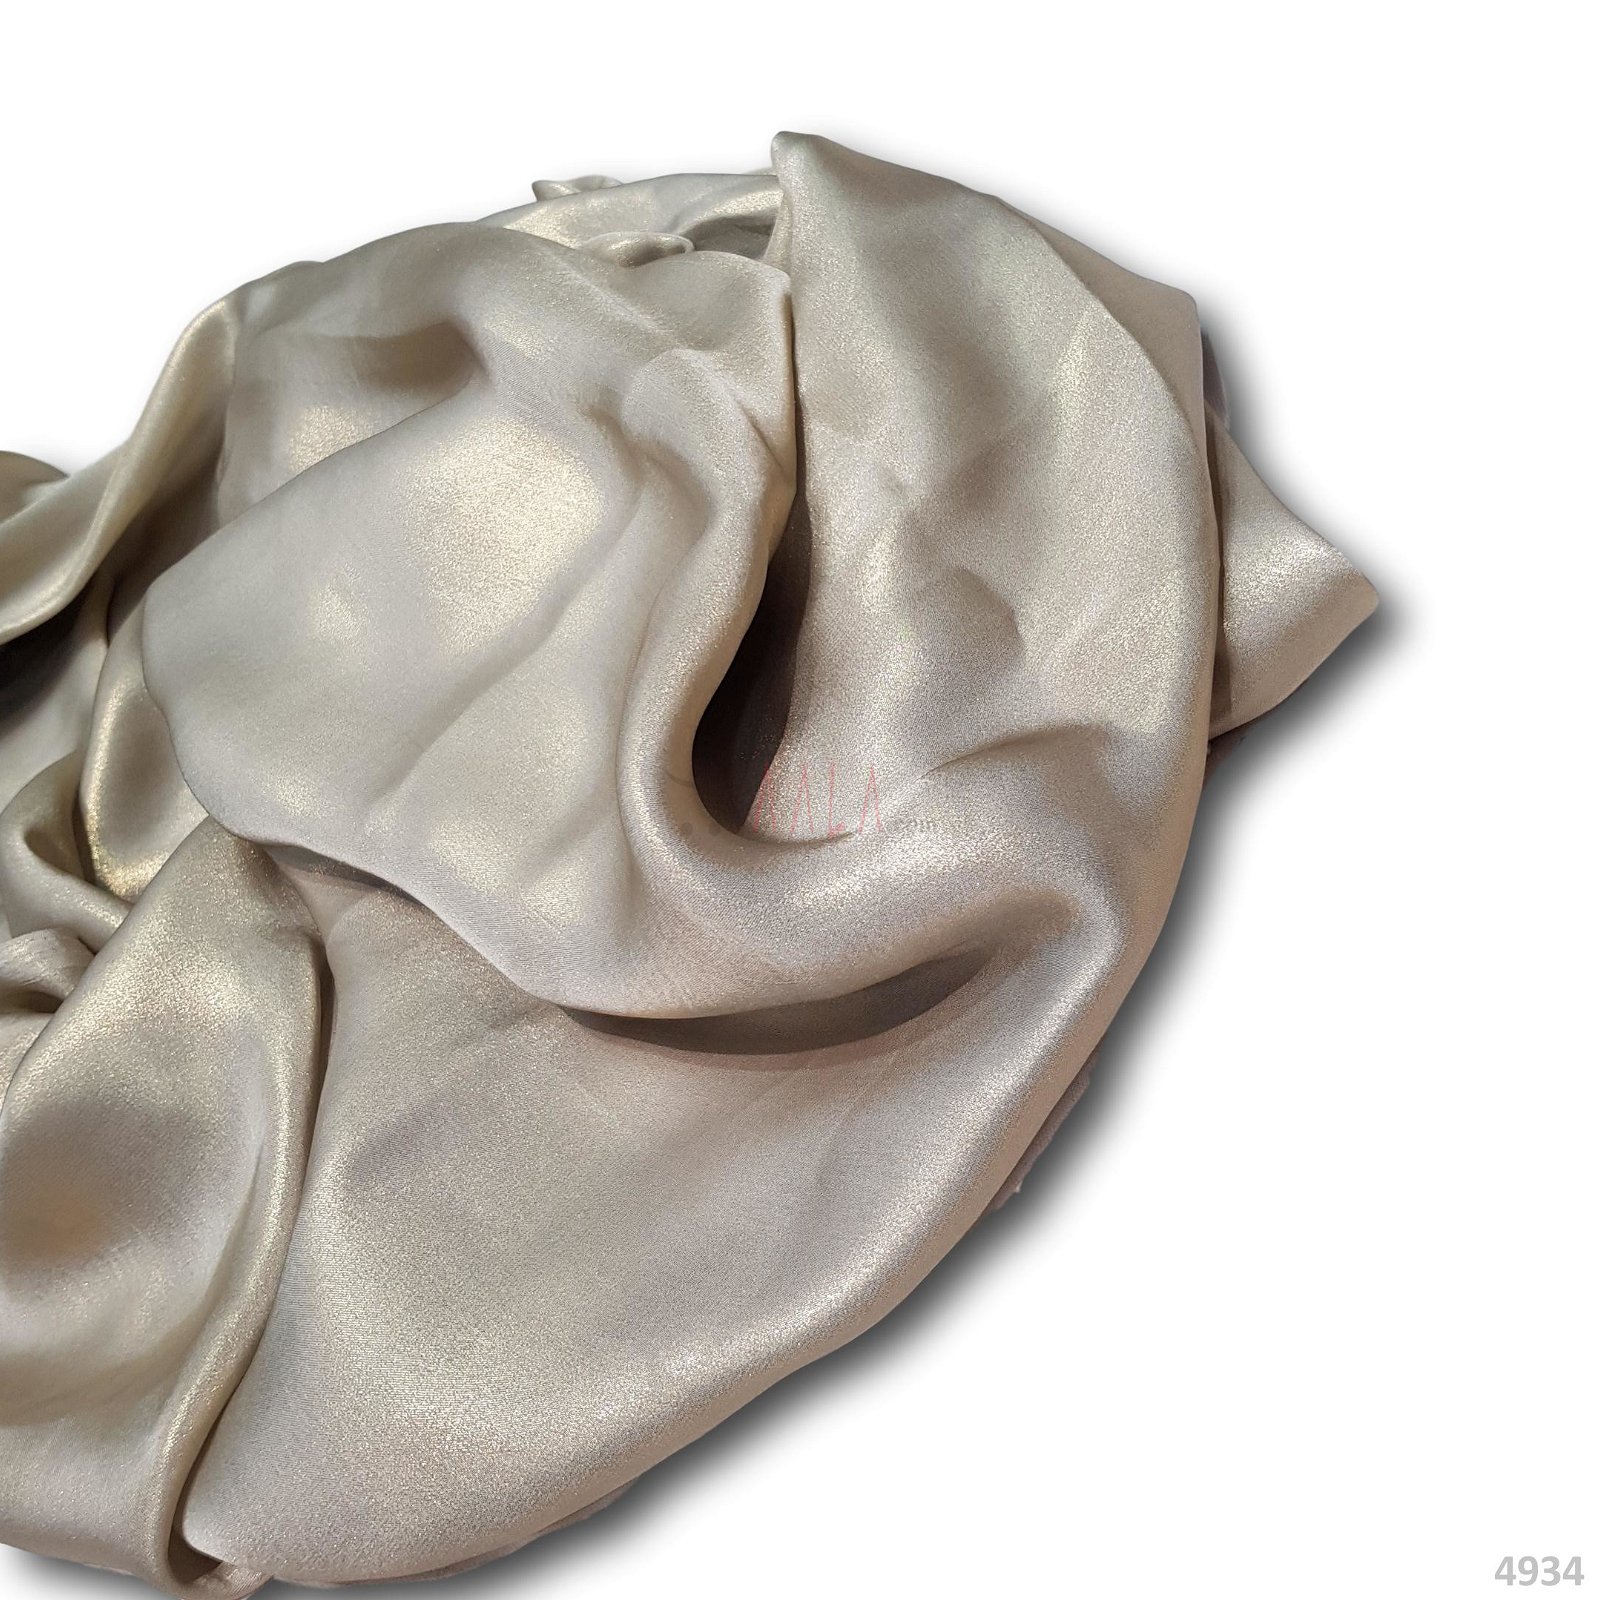 Foil Satin Georgette Poly-ester 44 Inches Dyed Per Metre #4934